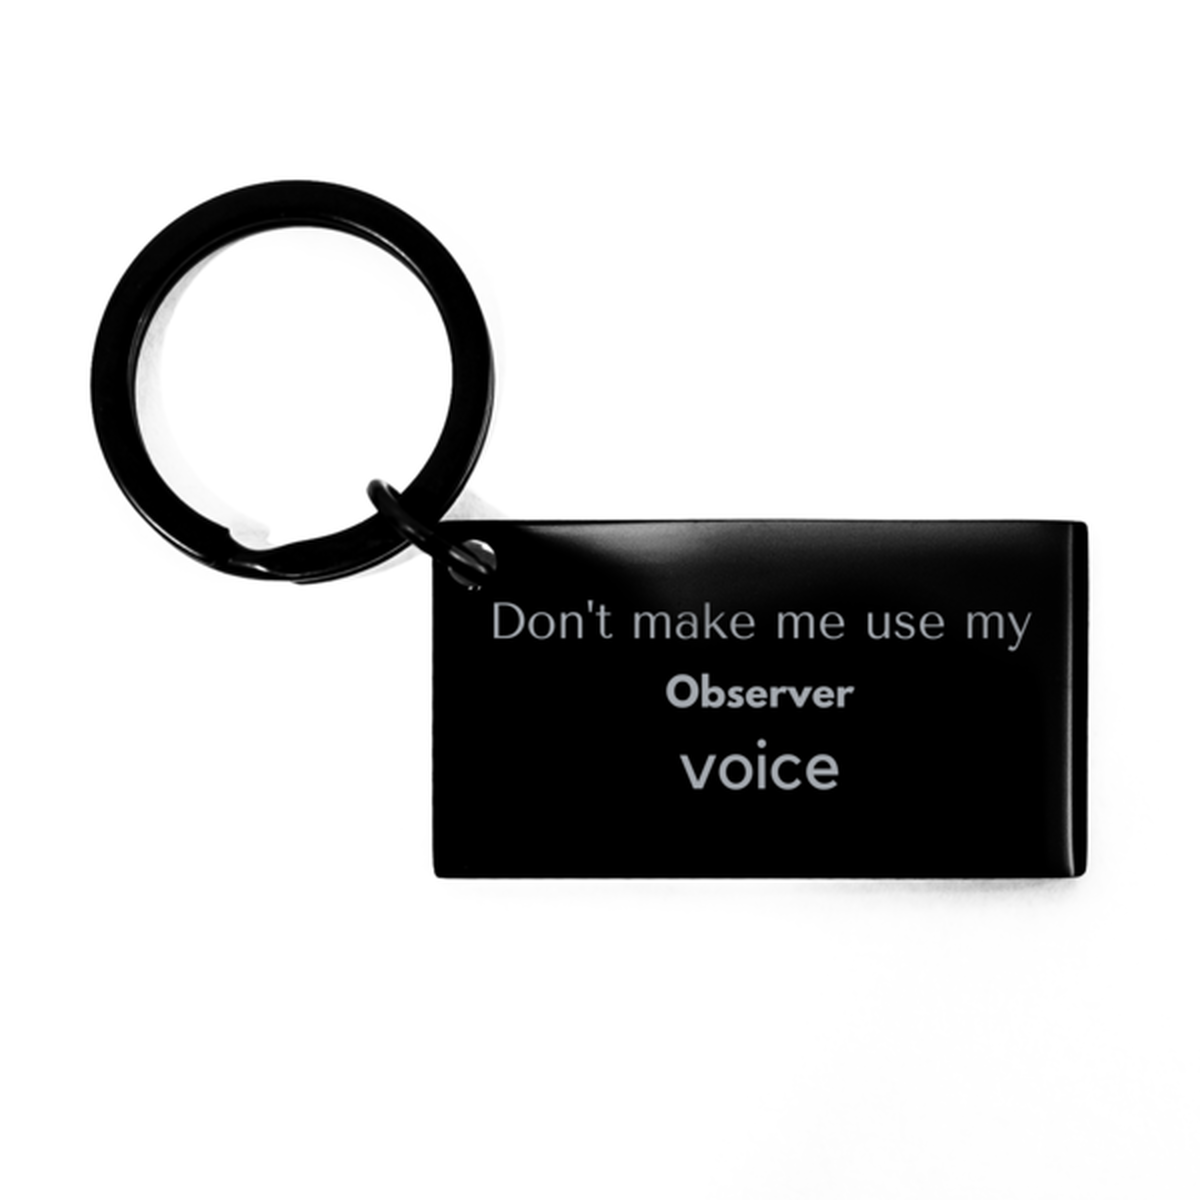 Don't make me use my Observer voice, Sarcasm Observer Gifts, Christmas Observer Keychain Birthday Unique Gifts For Observer Coworkers, Men, Women, Colleague, Friends